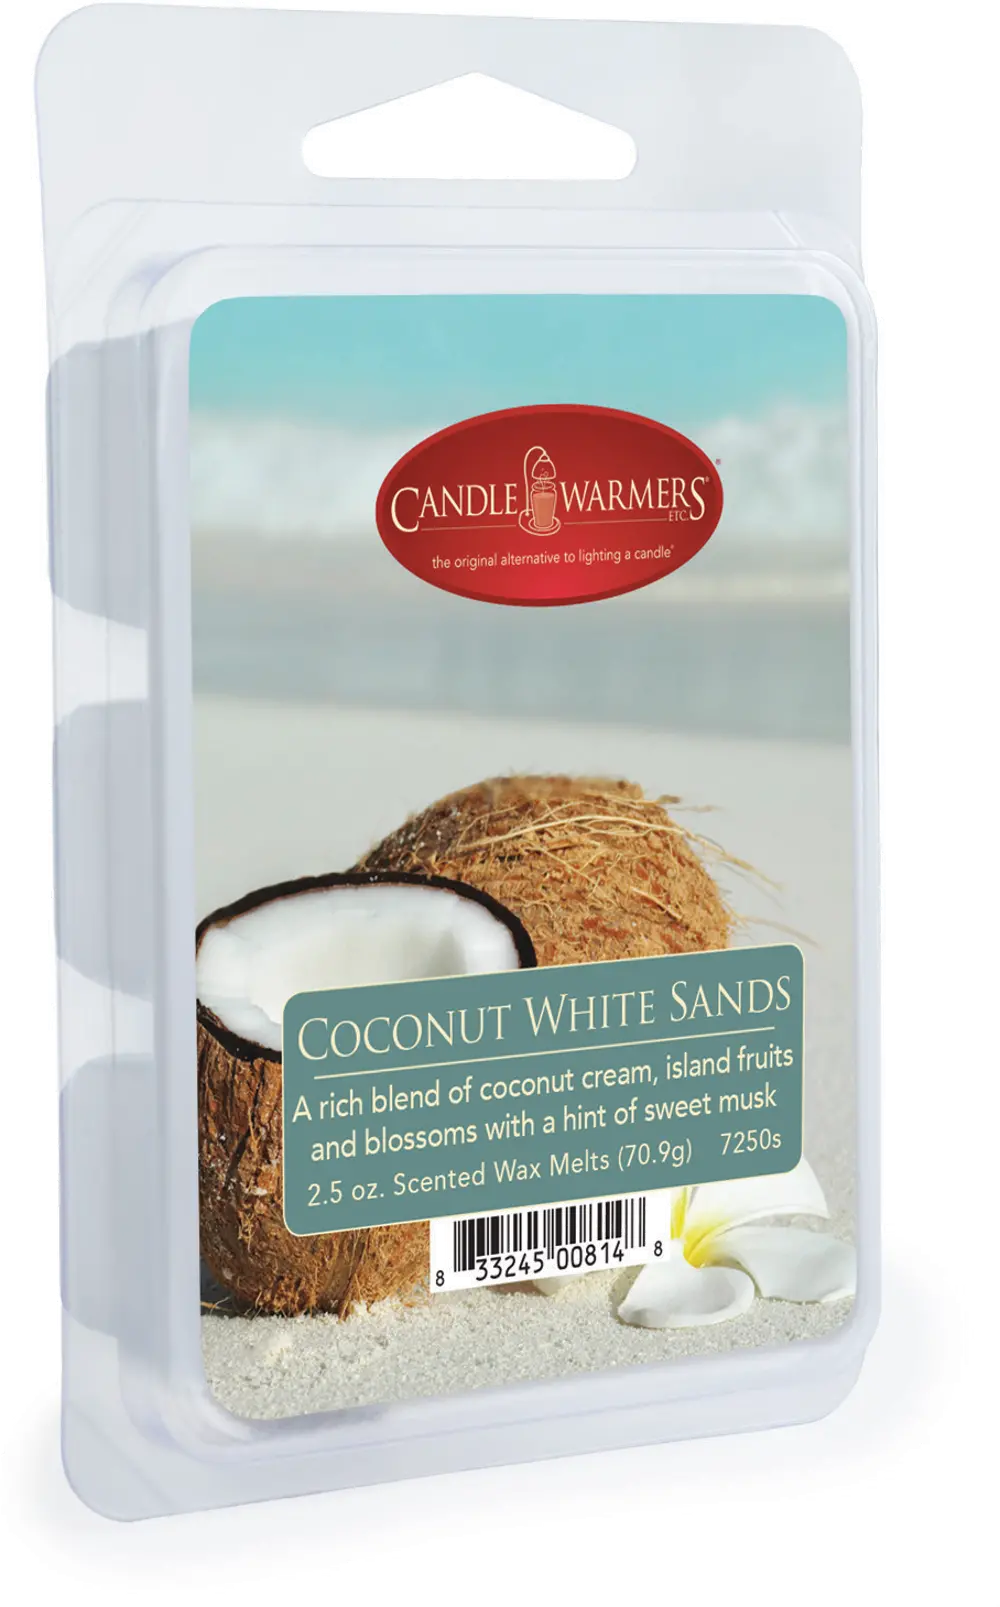 Coconut White Sands 2.5oz Wax Melt - Candle Warmers-1